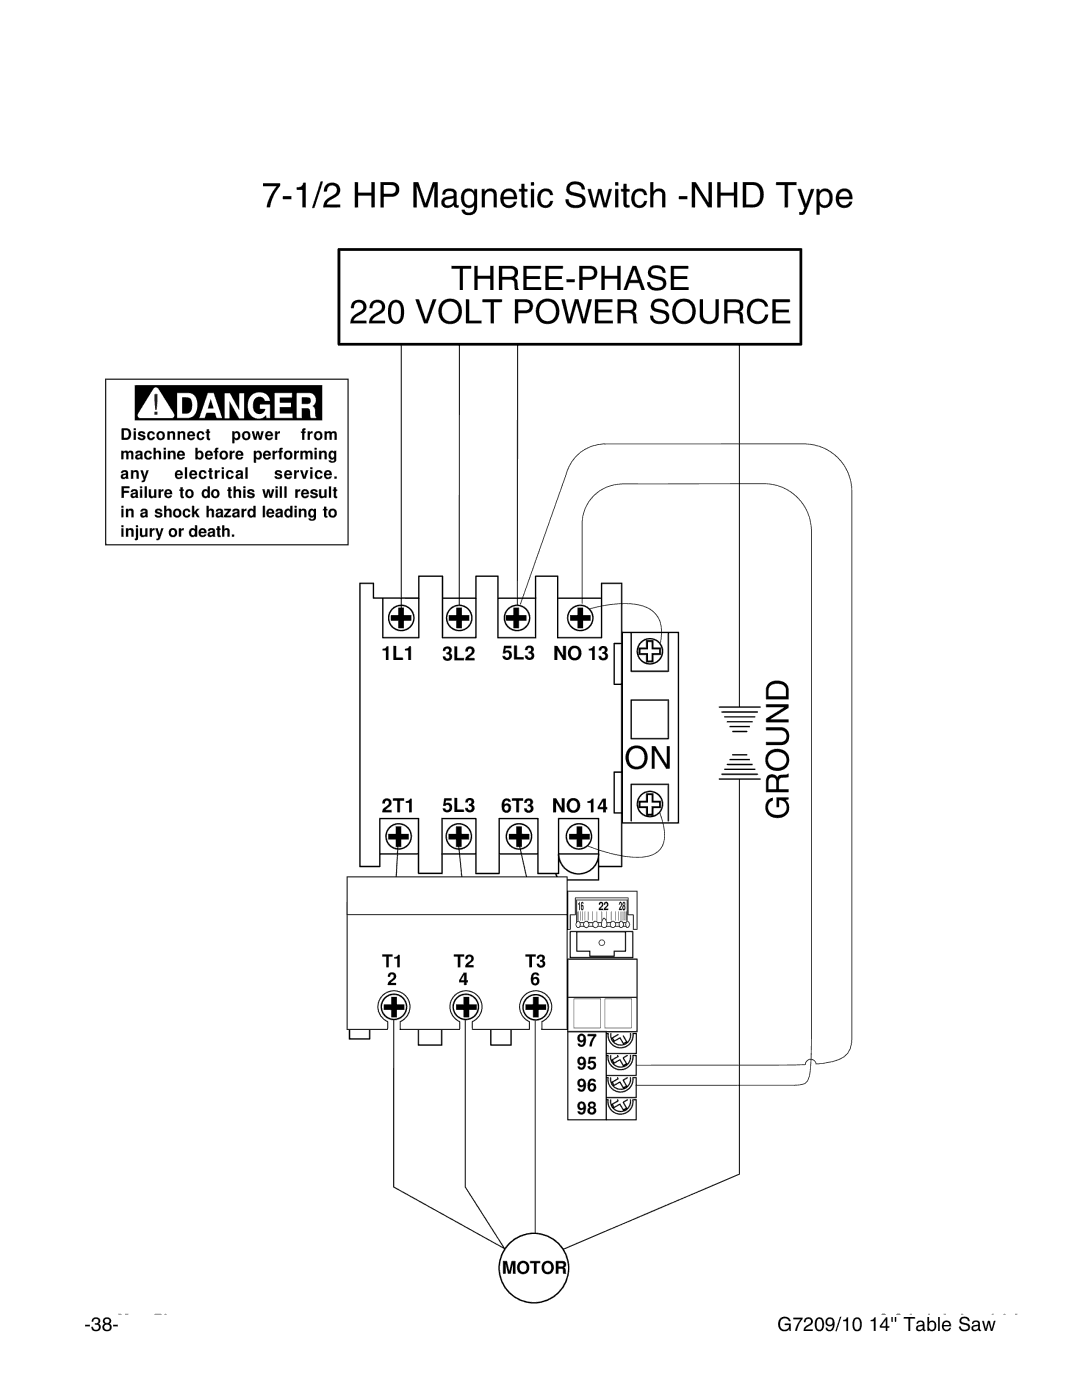 Grizzly G7209 instruction manual HP Magnetic Switch -NHD Type 